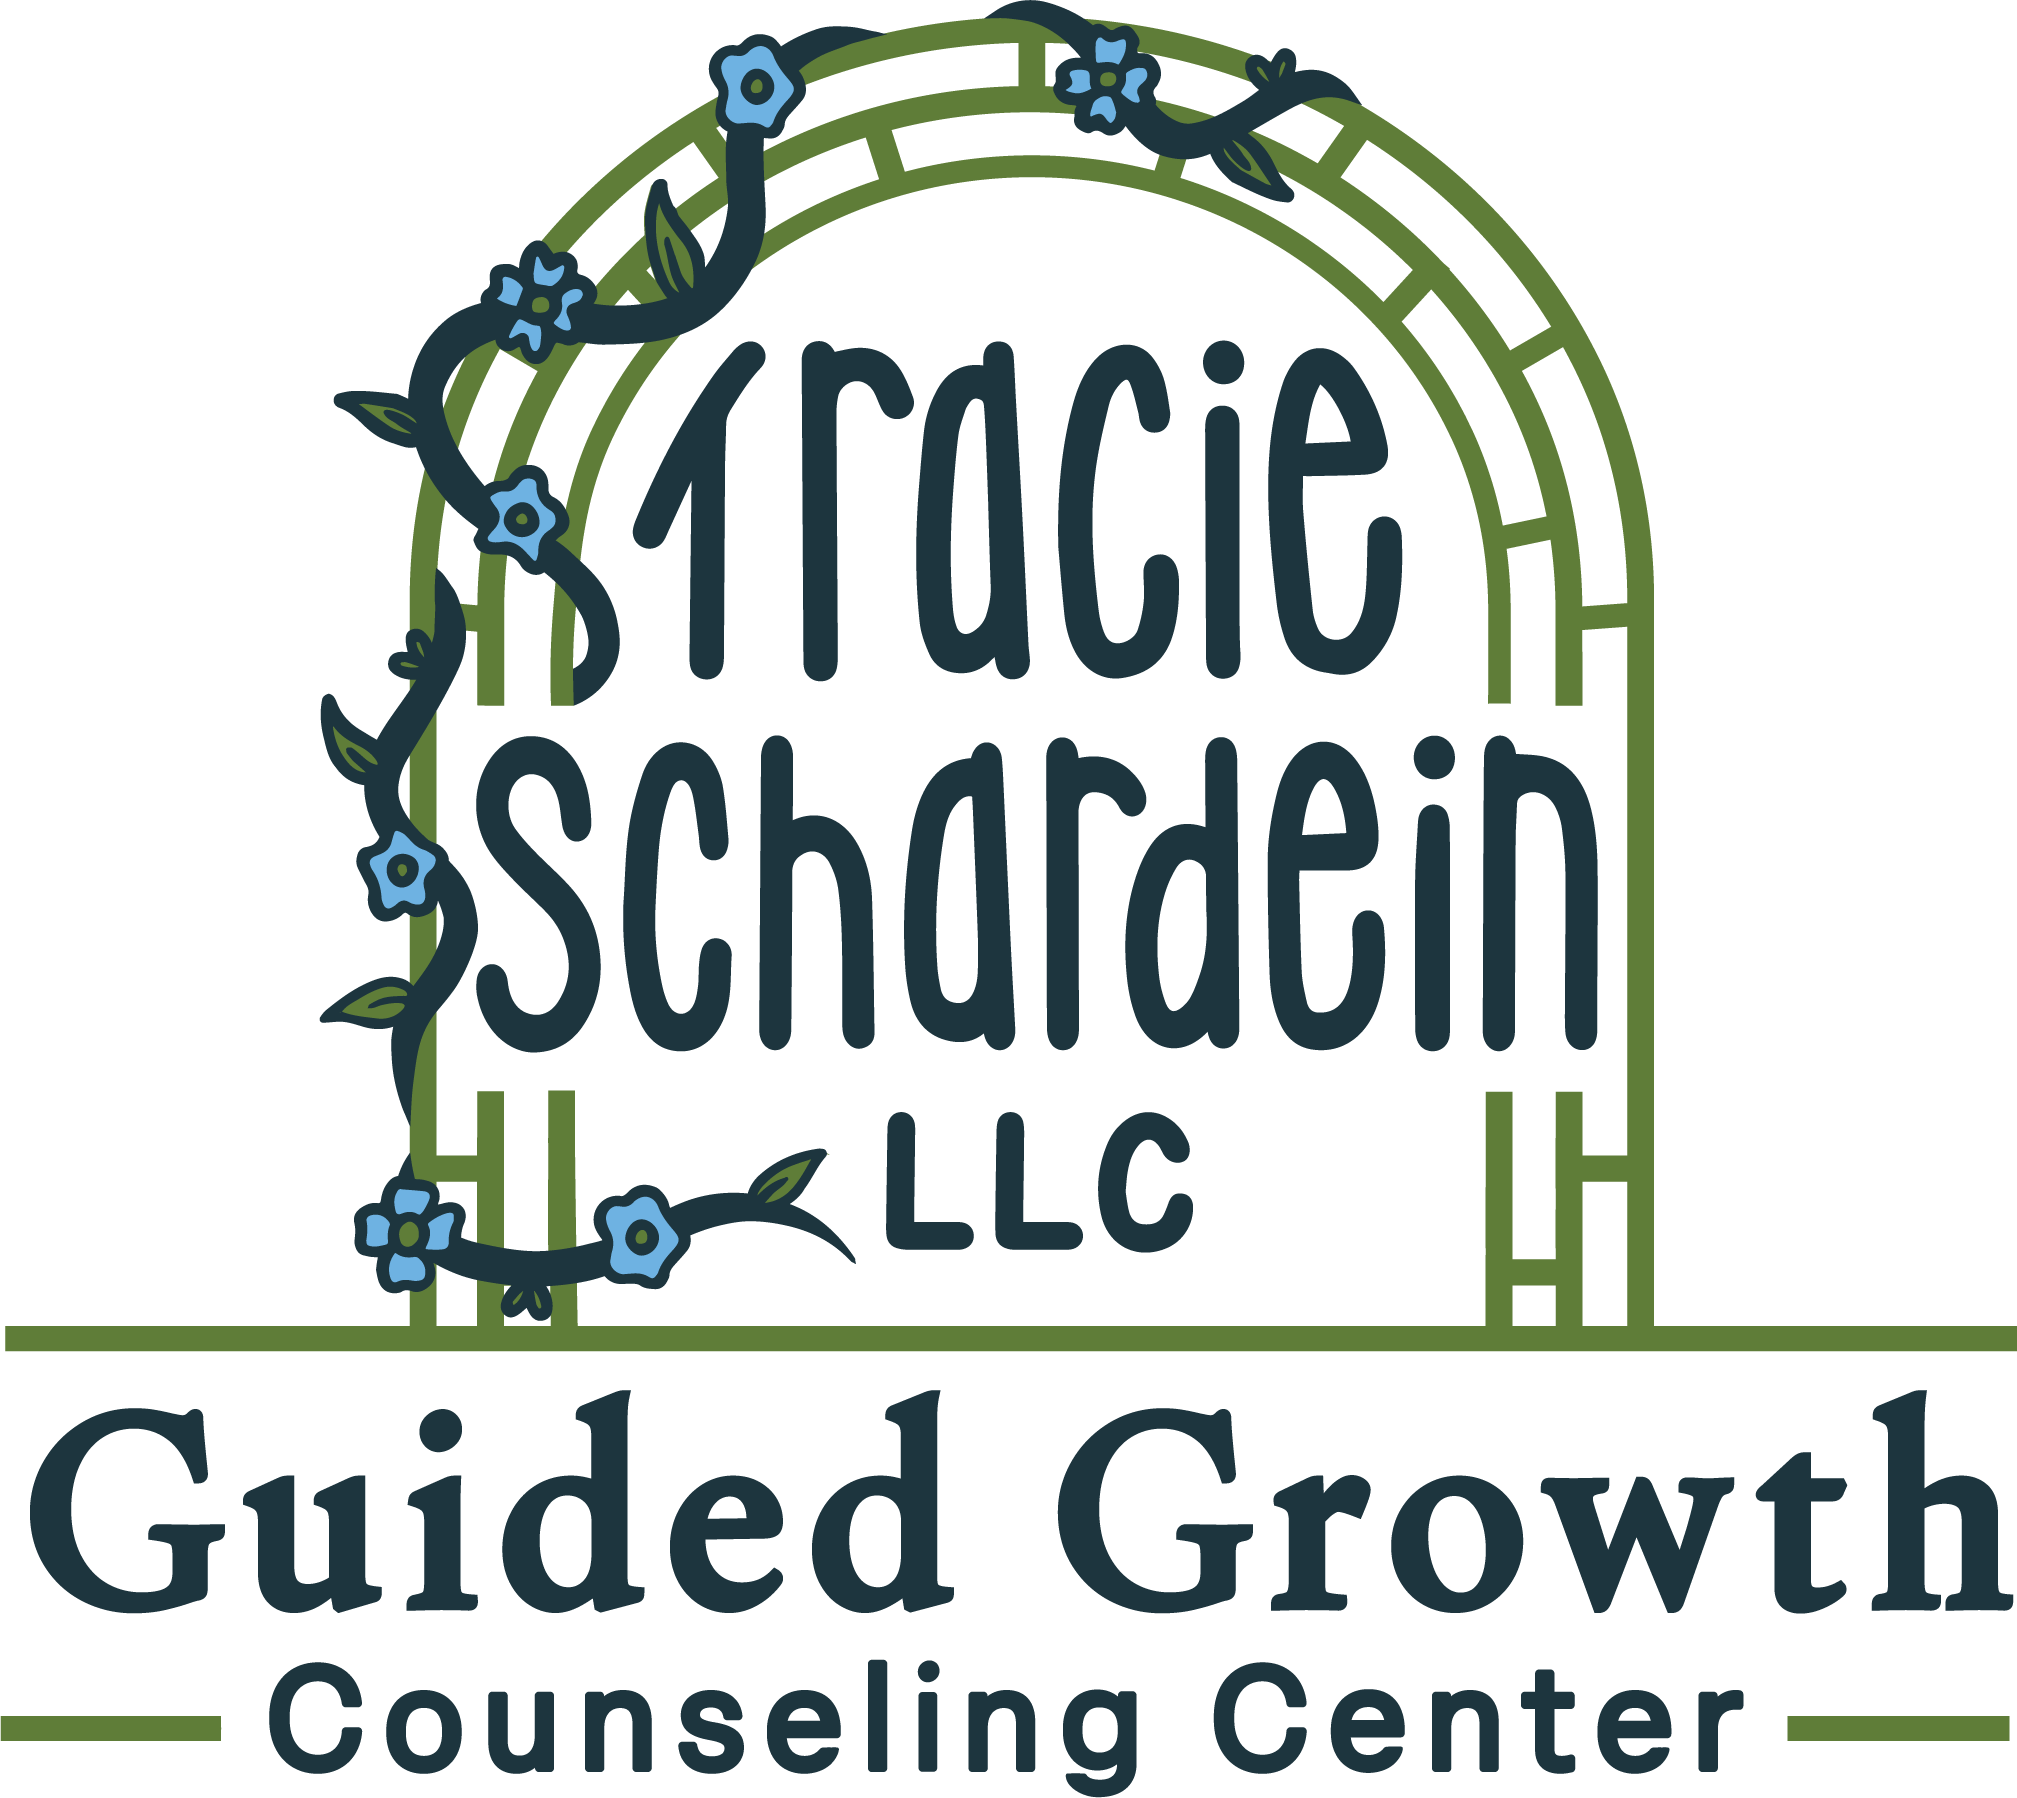 Guided Growth Counseling Center Tracie Schardein LLC Abilene Kansas online therapist arbor vines growing